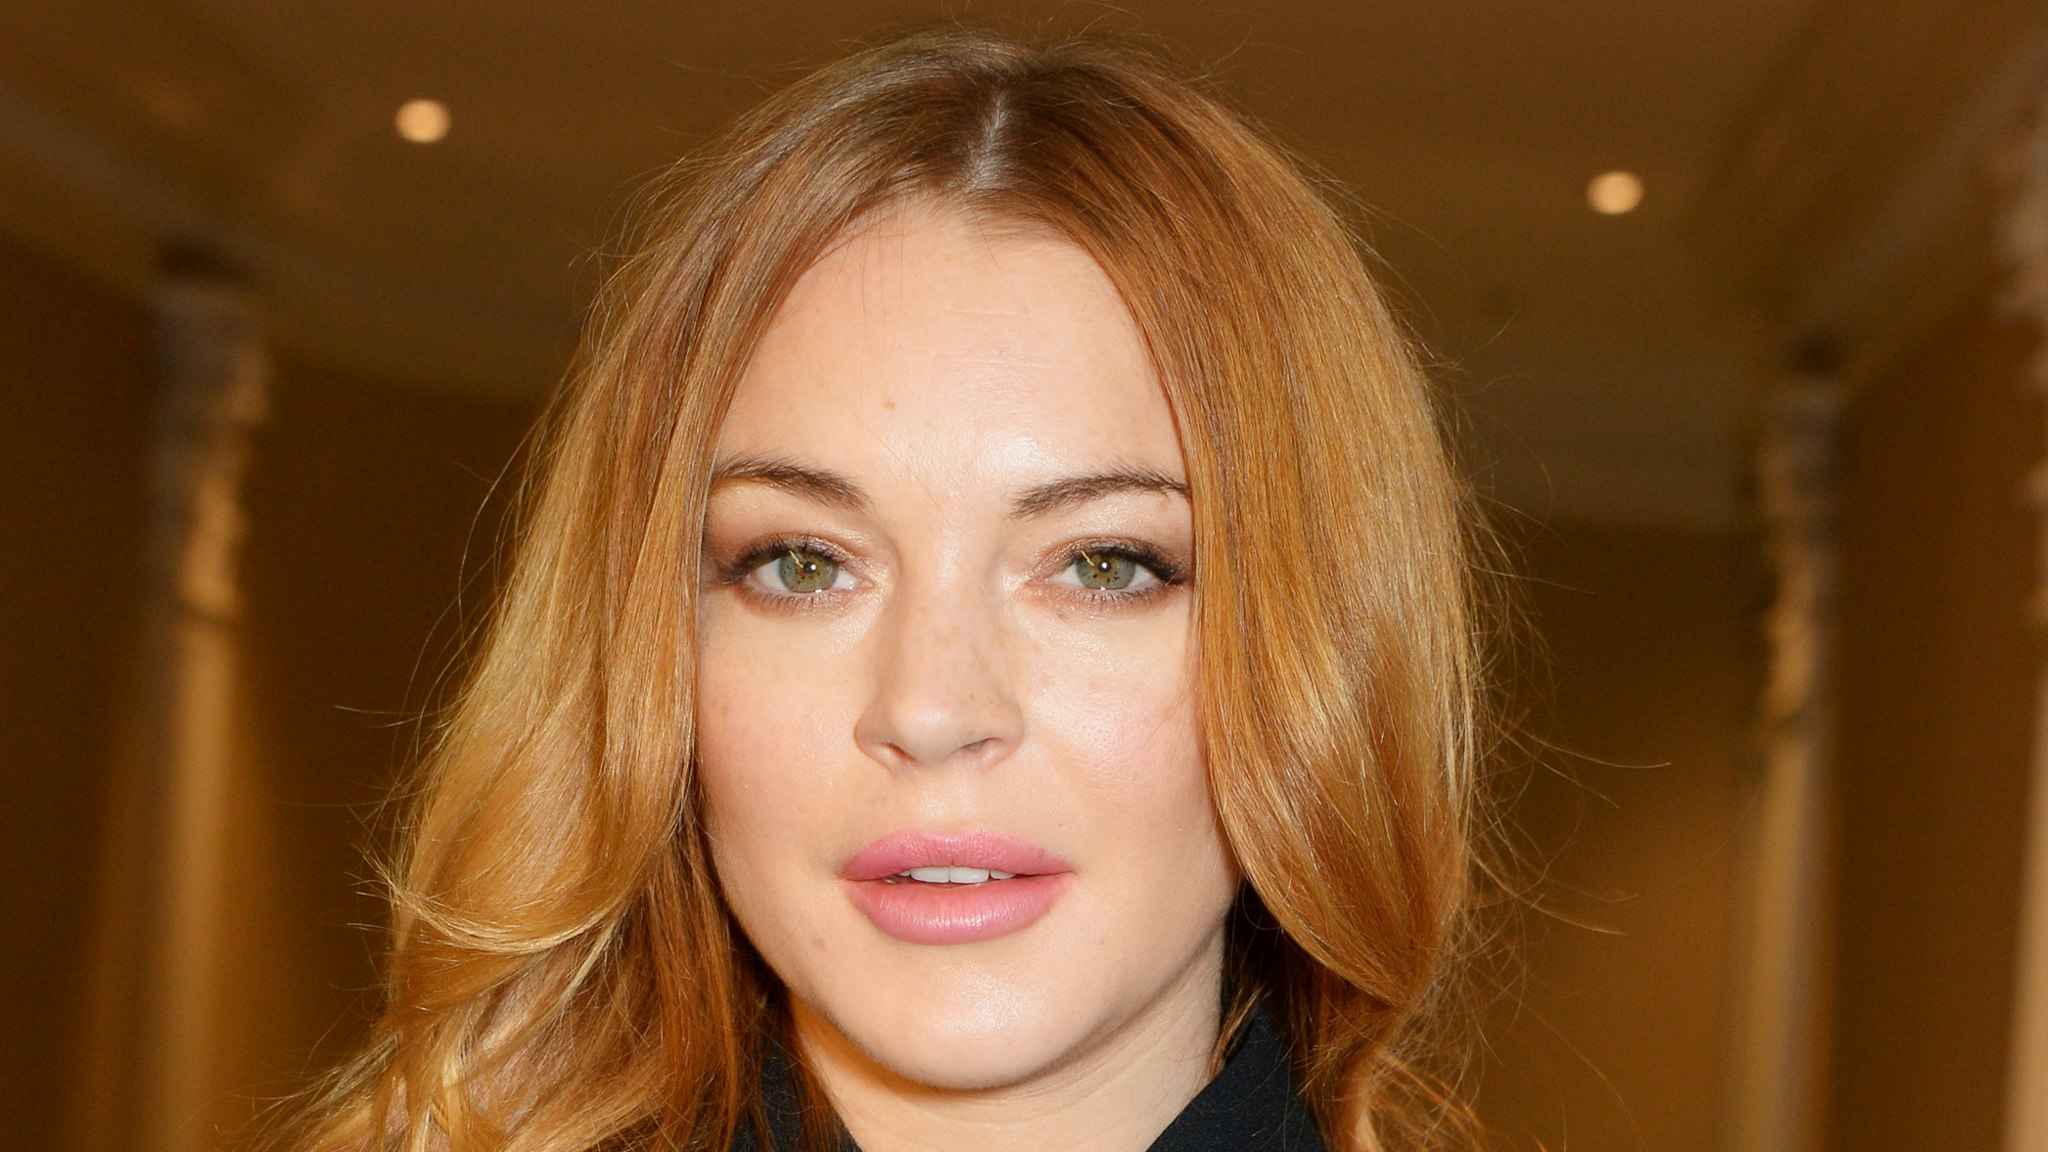 Lindsay Lohan attends The 59th Women of the Year Lunch at the InterContinental Park Lane Hotel on October 13, 2014 in London, England.